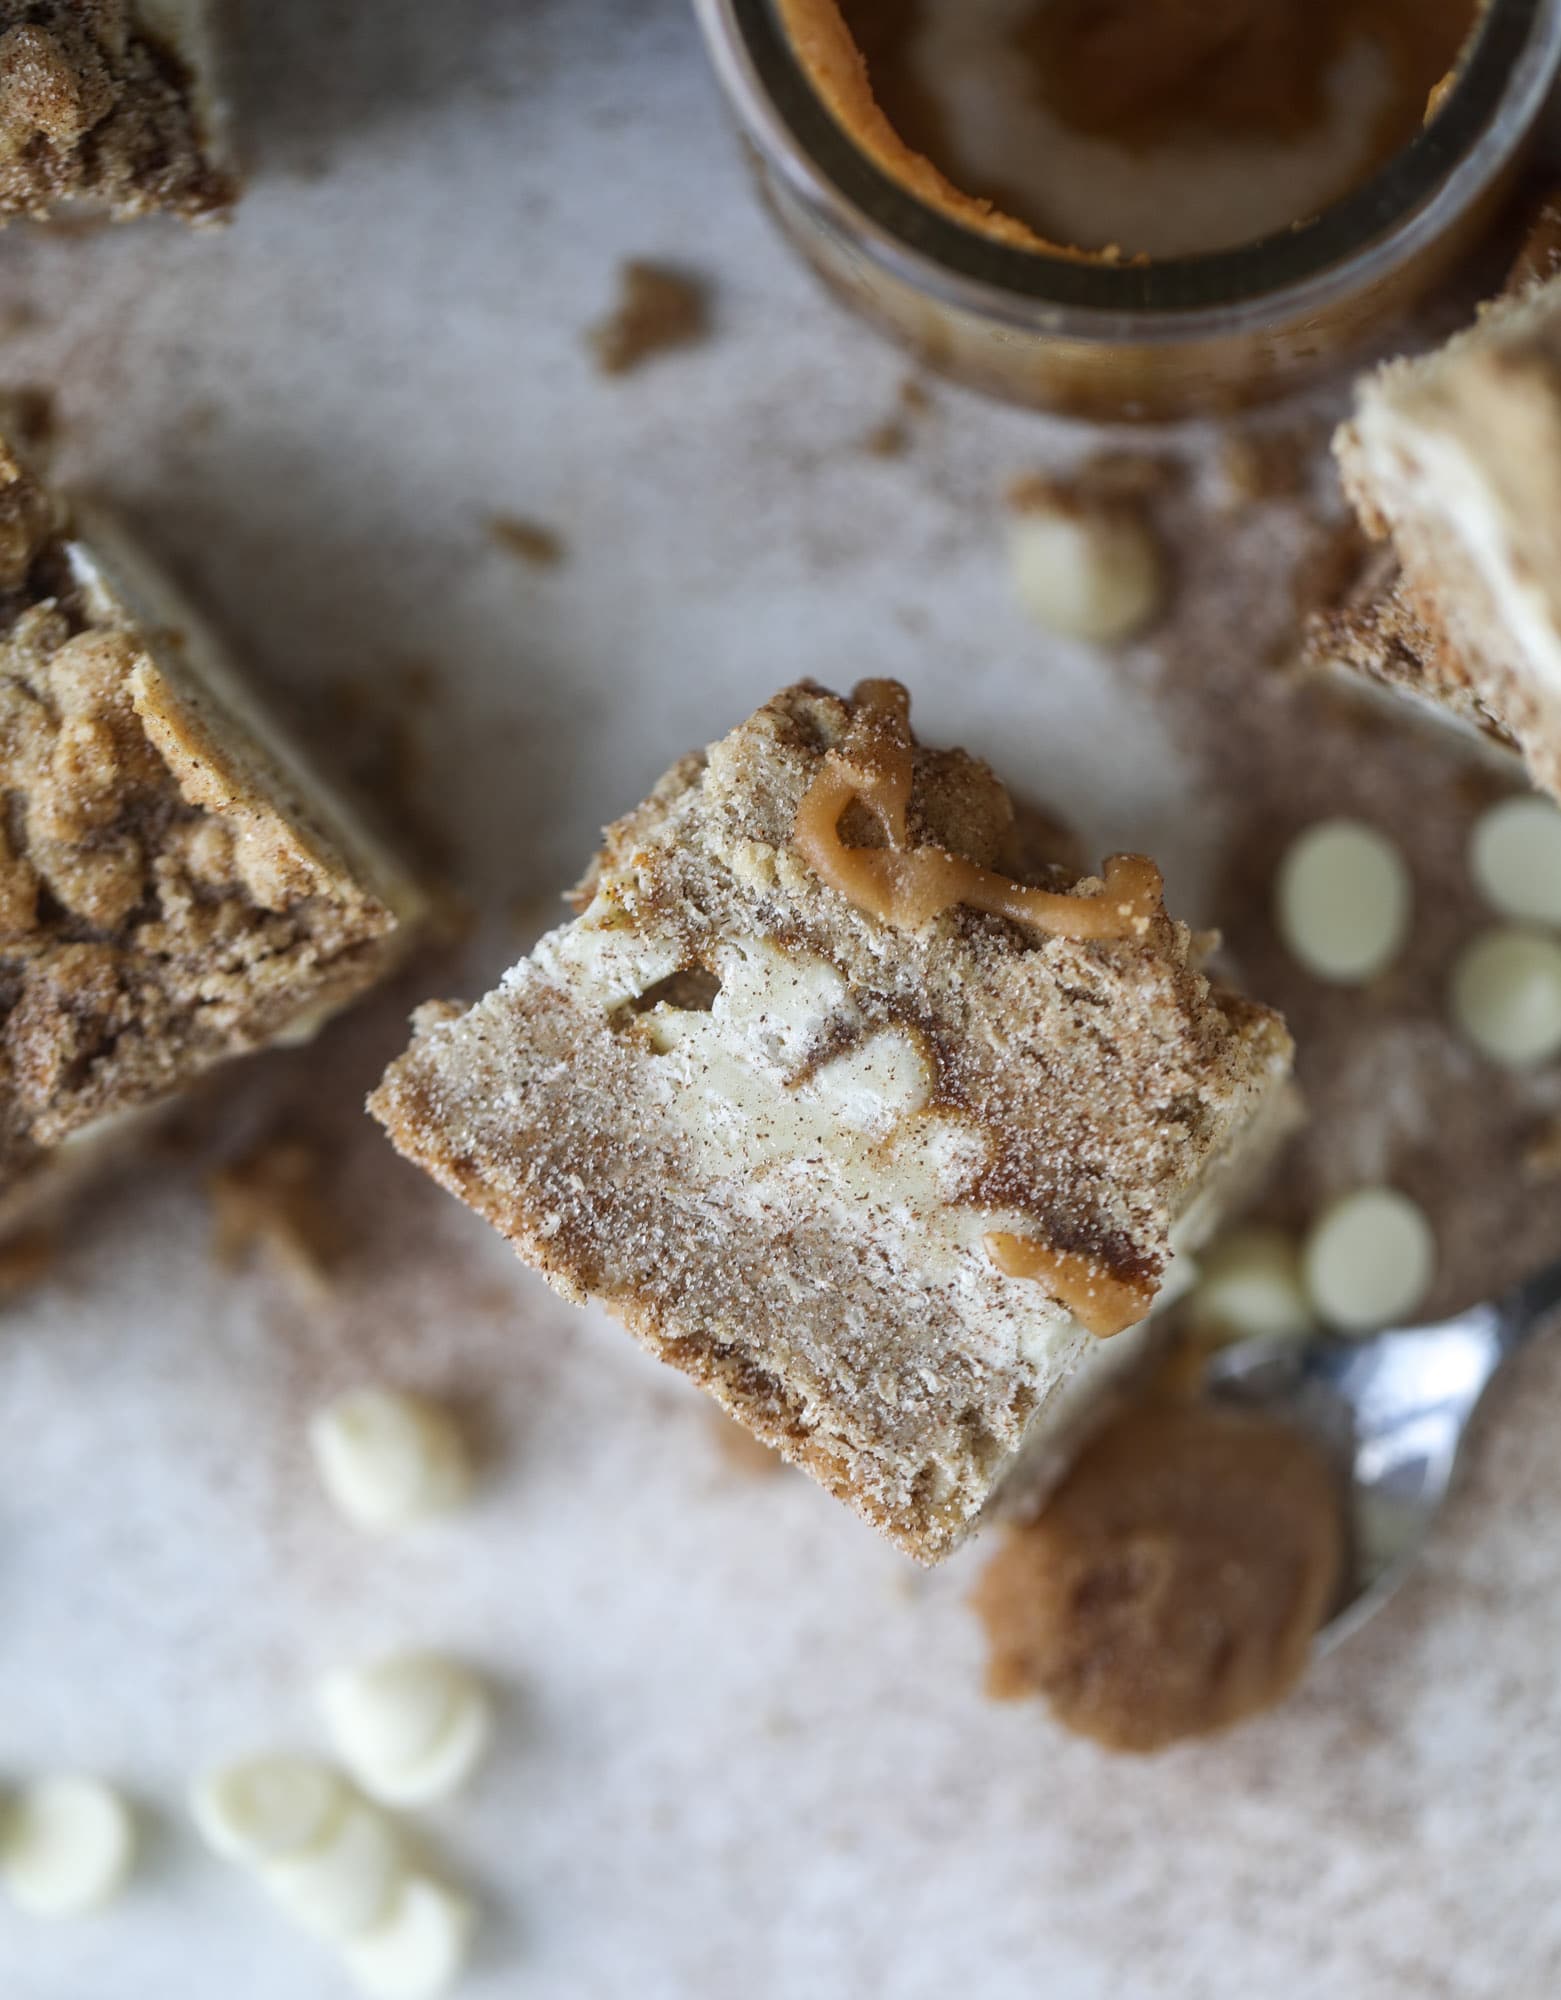 These snickerdoodle caramelitas have a layer of chewy, cinnamon sugared oatmeal bar topped with cream white chocolate and more crumbly, chewy oatmeal bites. They are super delicious and festive! I howsweeteats.com #snickerdoodle #caramelitas